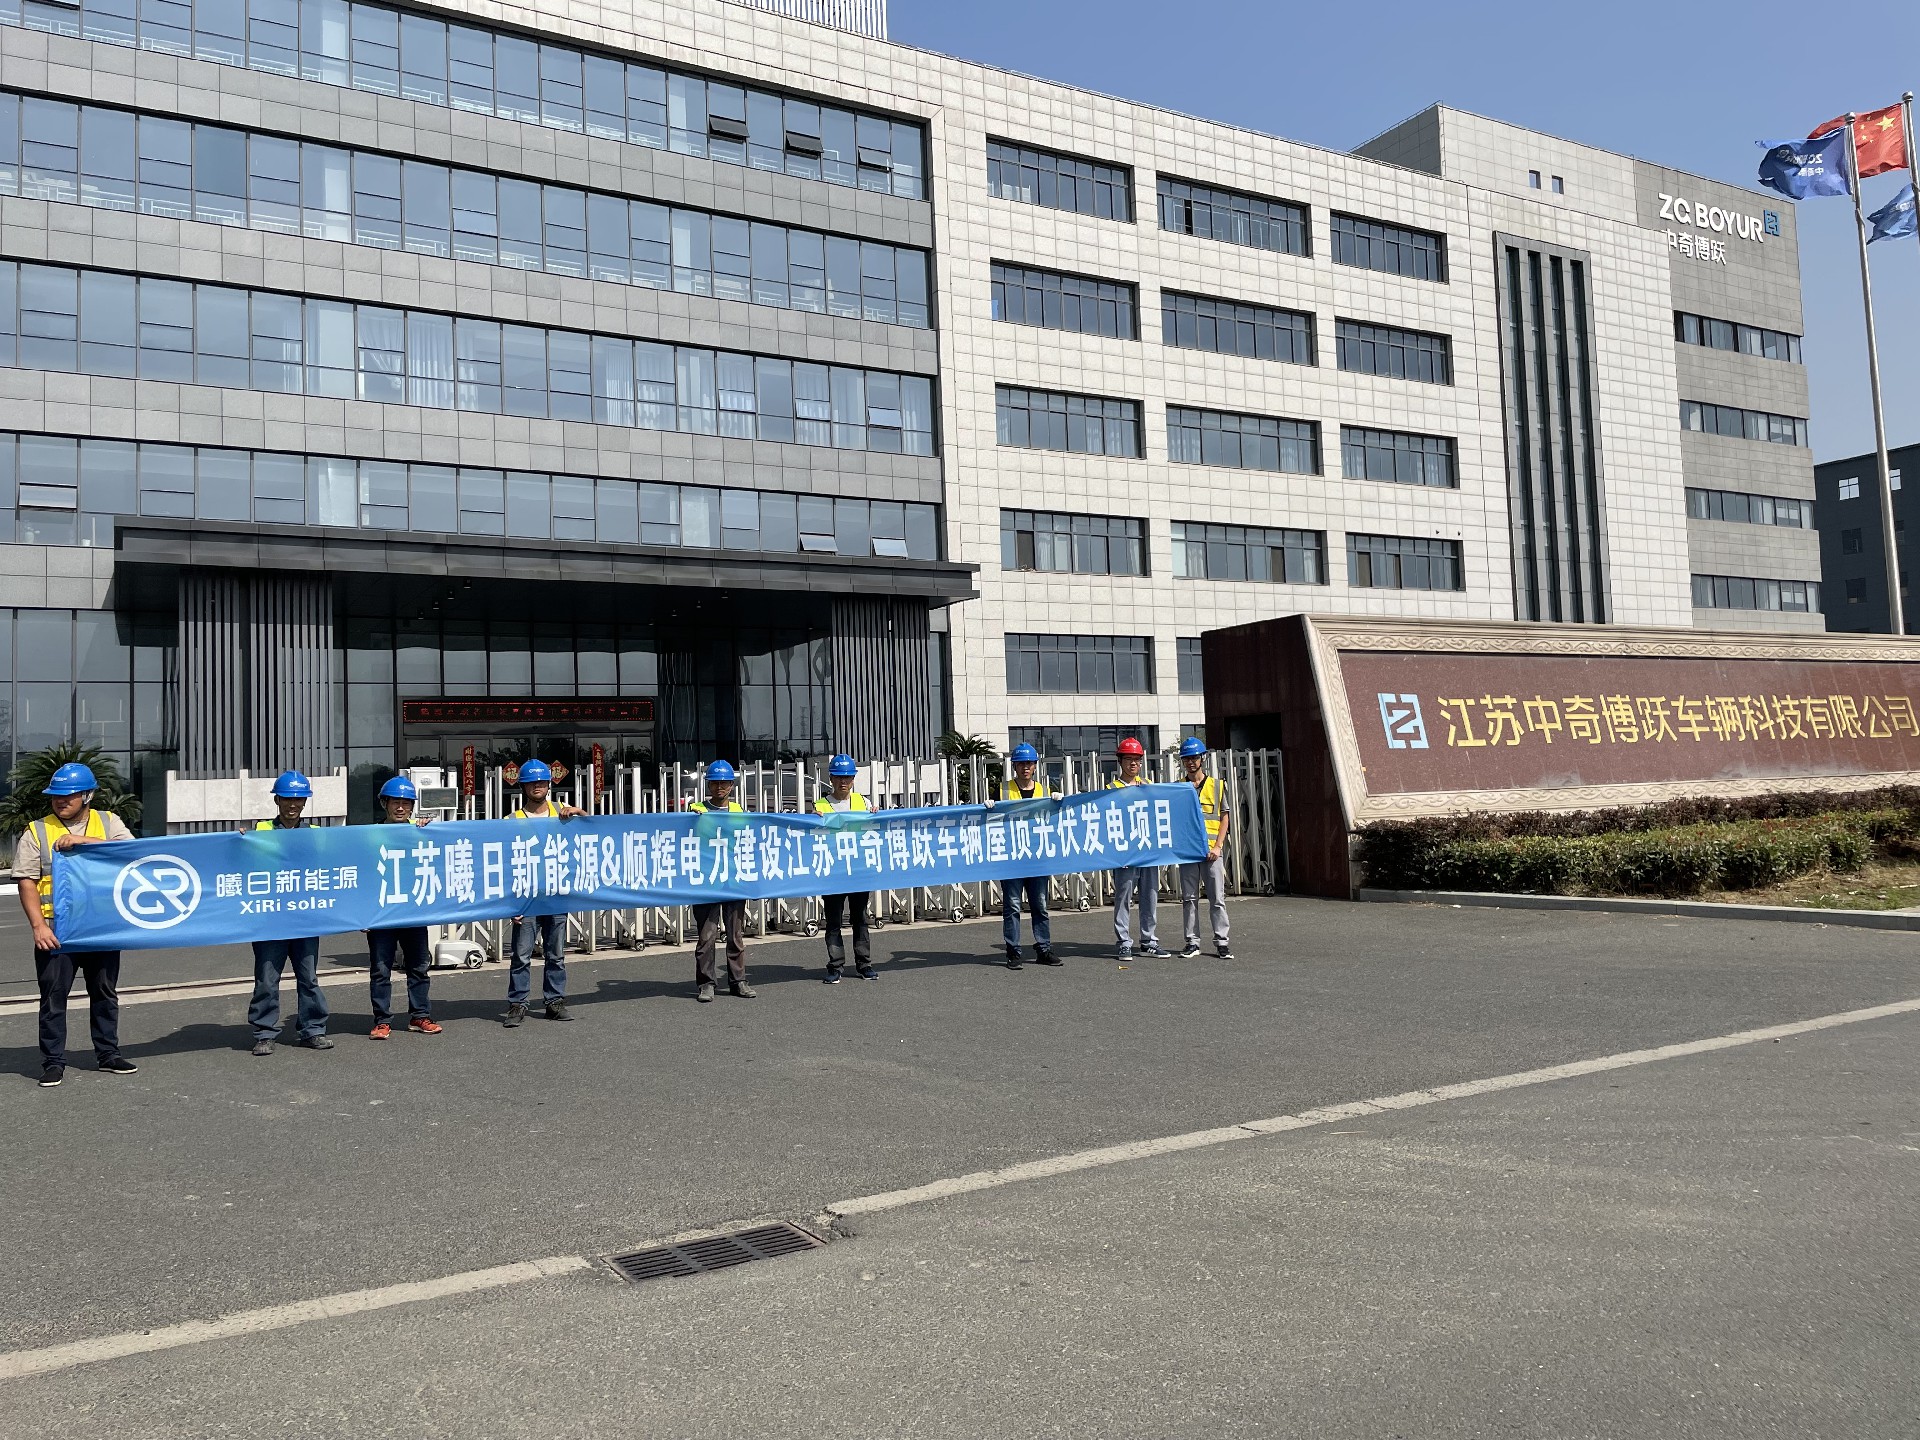 China Qiboyue Vehicle Technology Co., Ltd. distributed photovoltaic project officially started